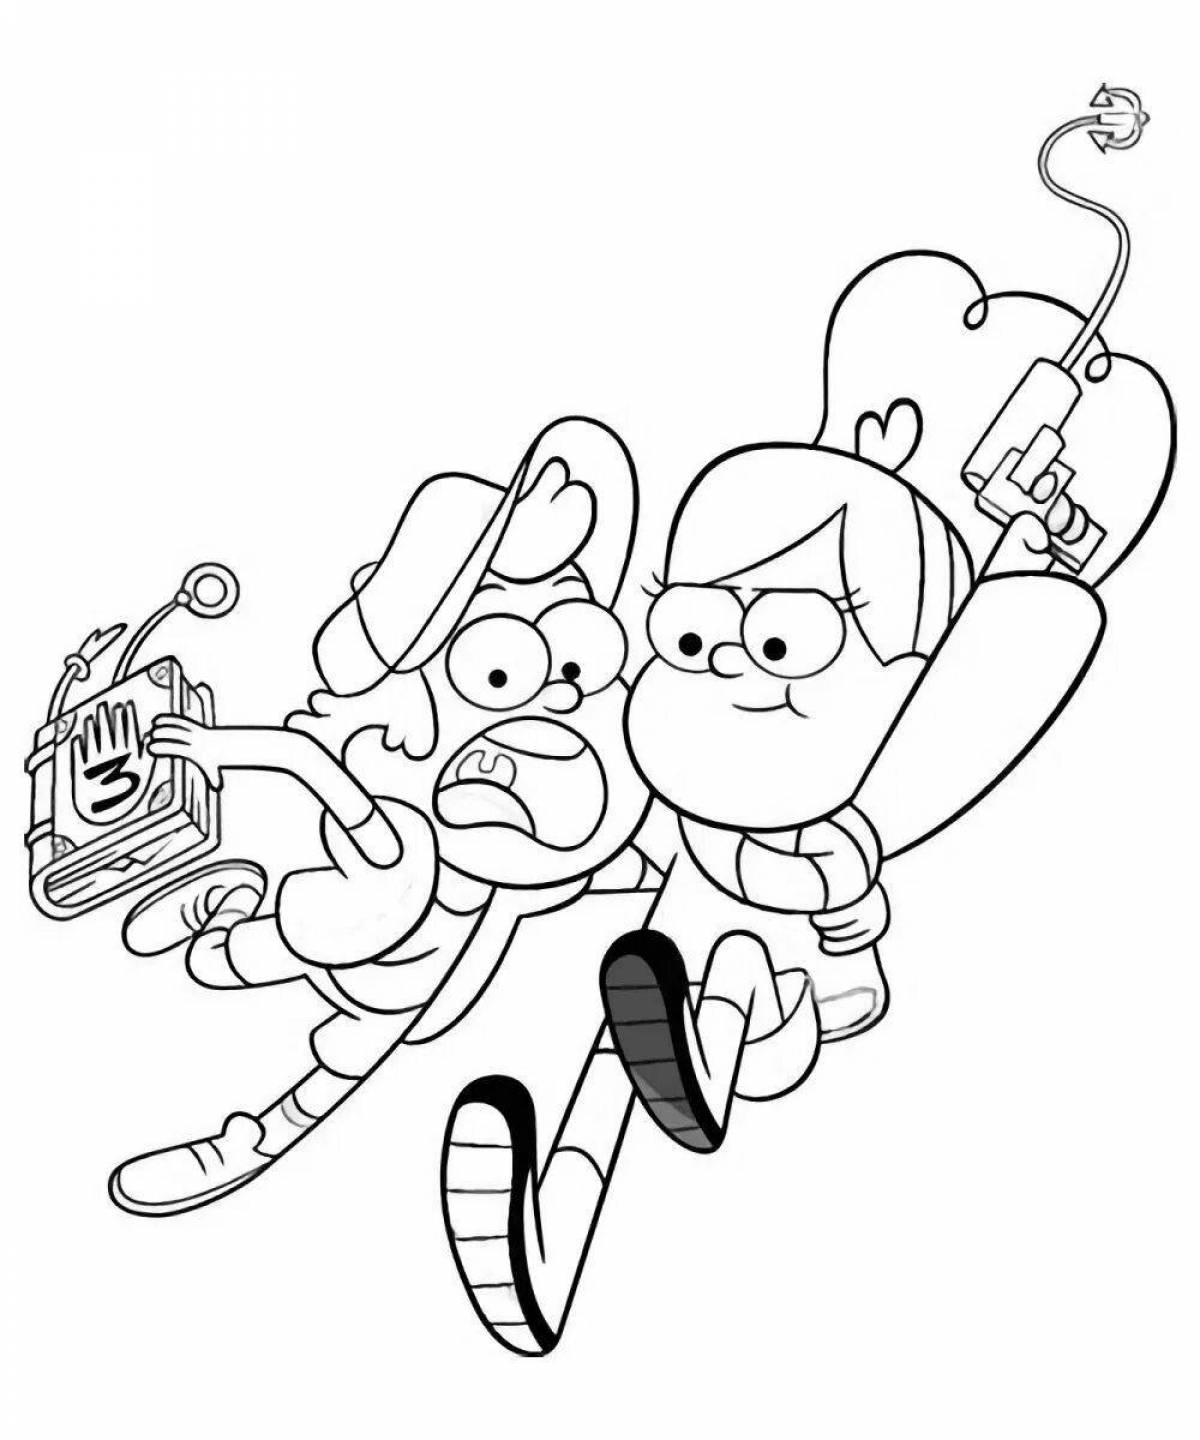 Glowing Mabel and Dipper coloring page